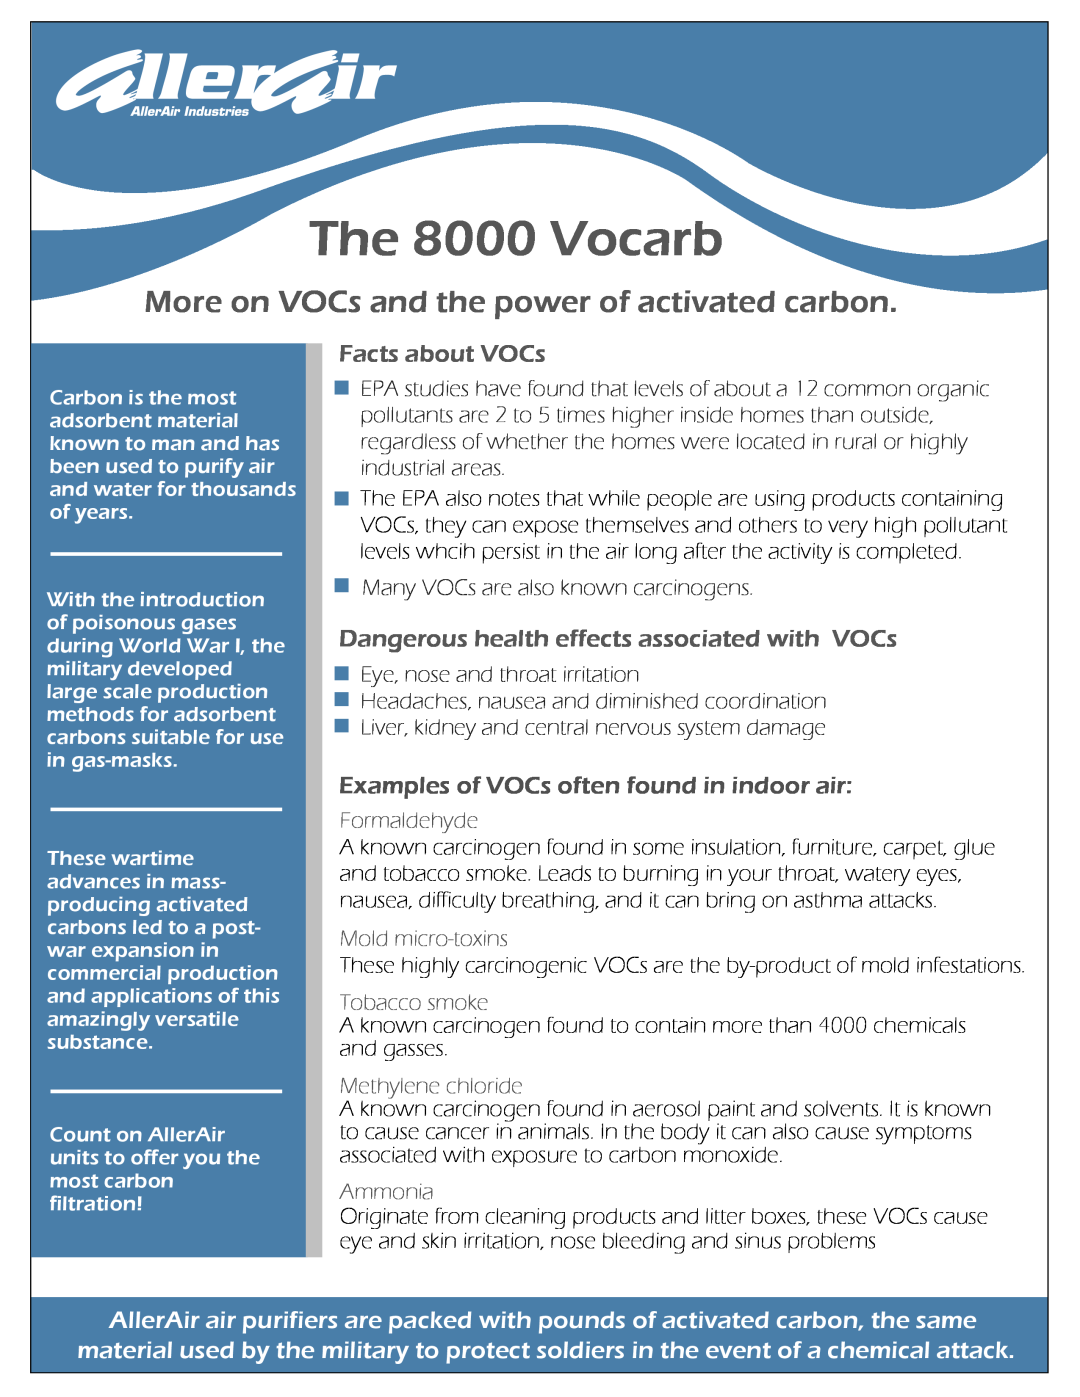 AllerAir More on VOCs and the power of activated carbon, Facts about VOCs, The 8000 Vocarb, Formaldehyde, Tobacco smoke 